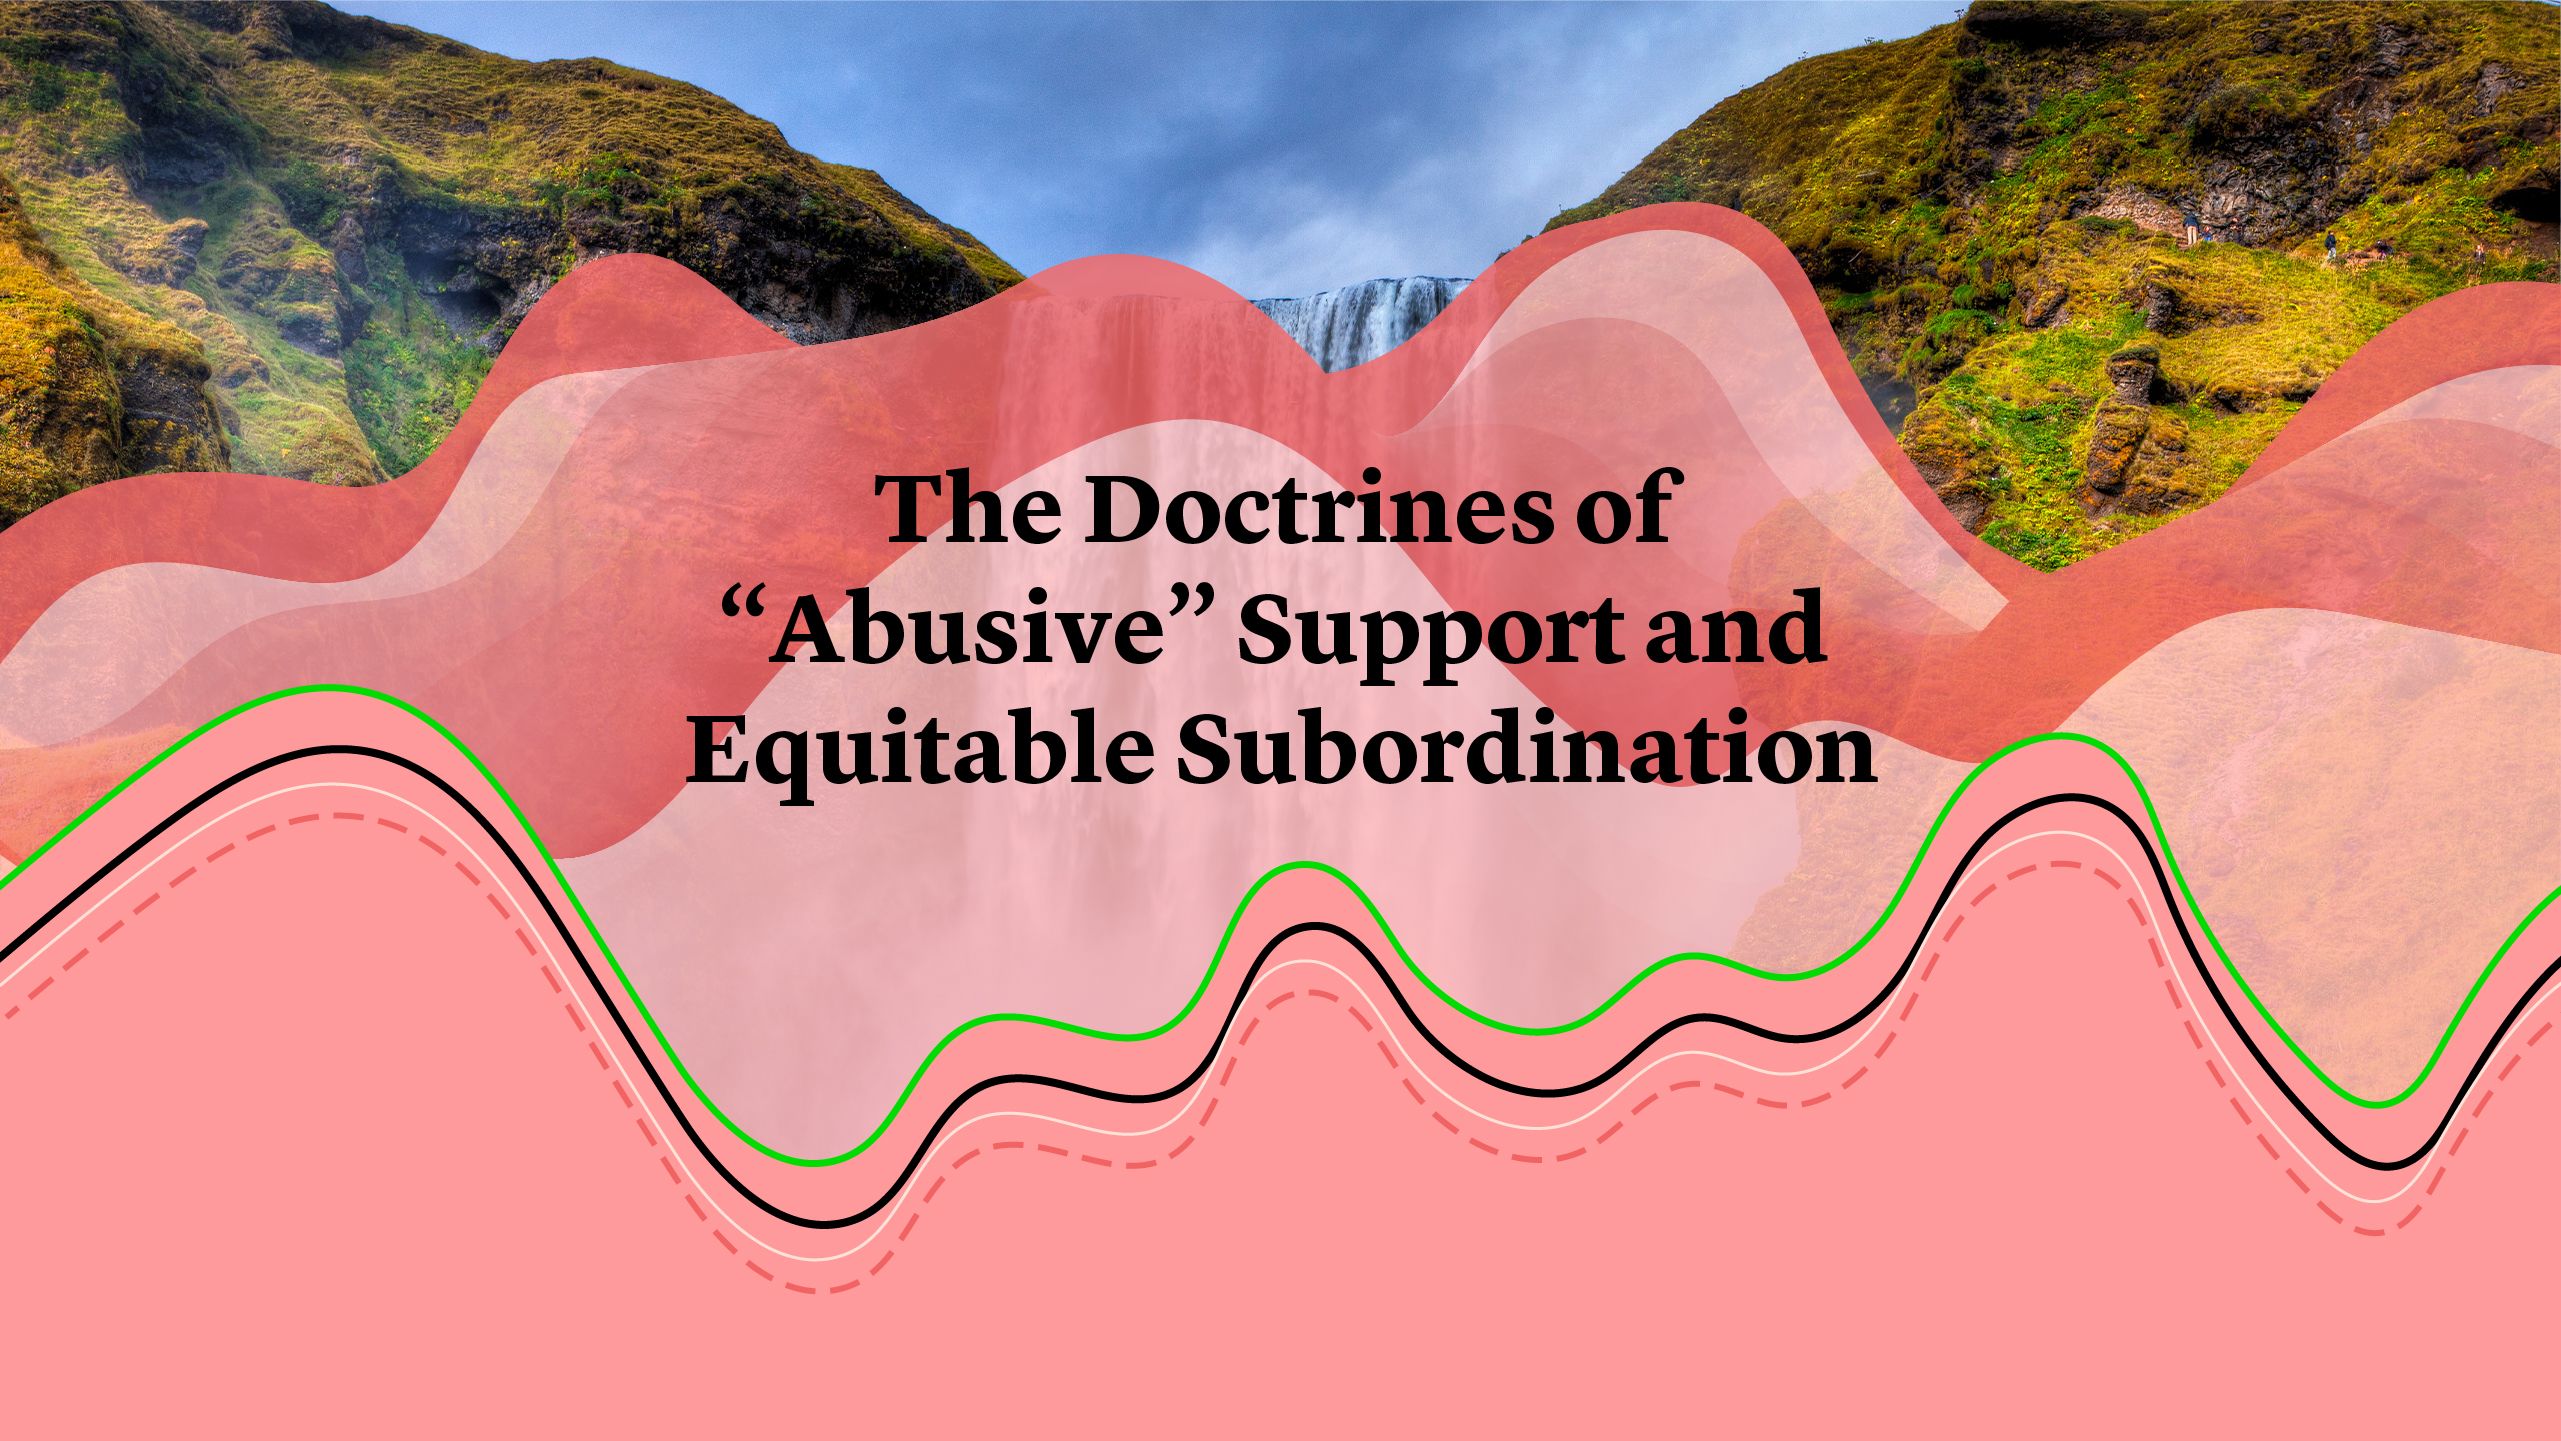 The Doctrines of “Abusive” Support and Equitable Subordination